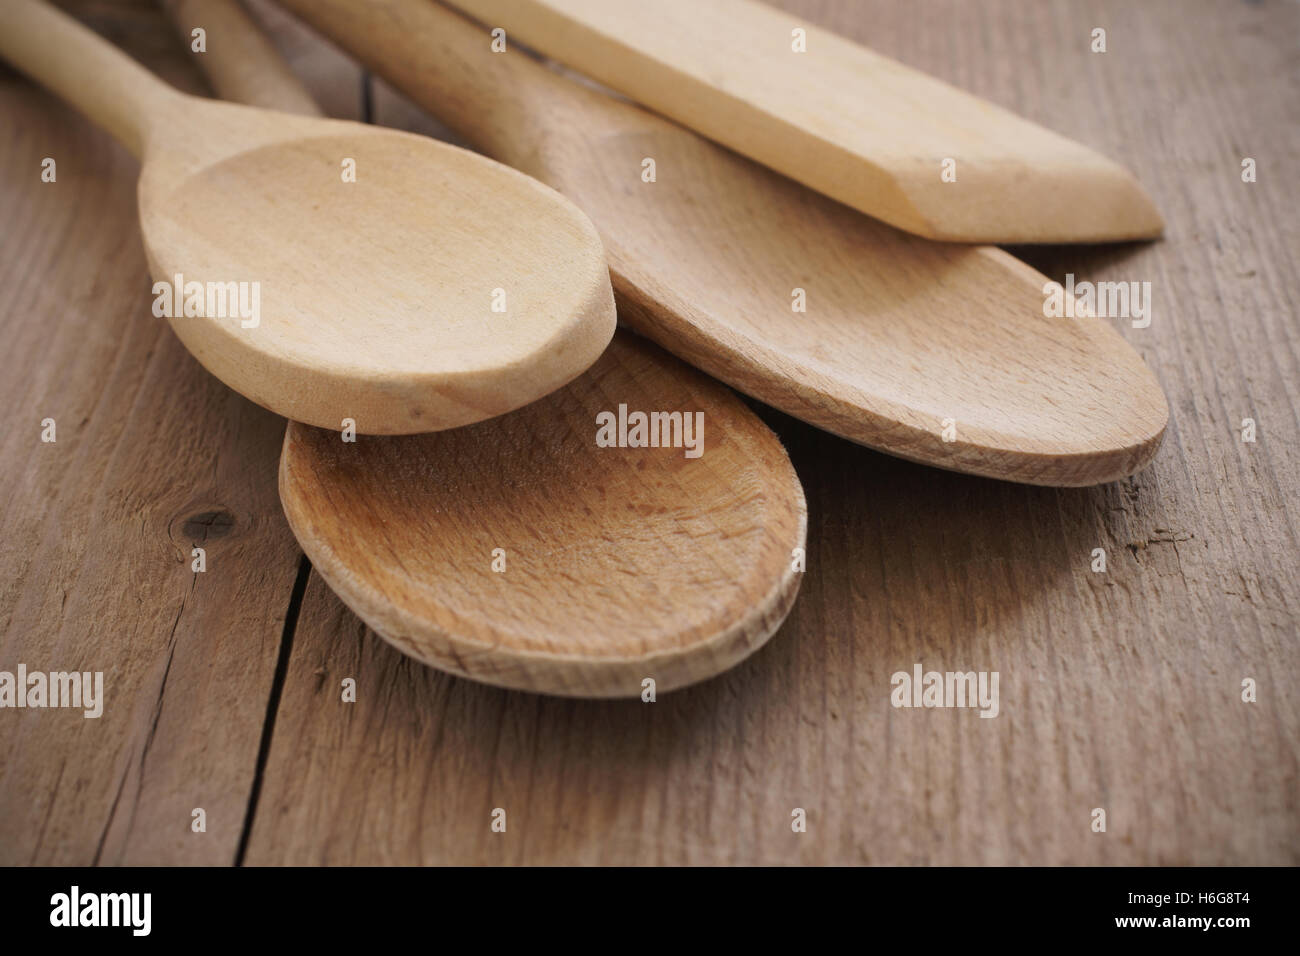 Wooden cooking spoons on a rustic wooden table background Stock Photo